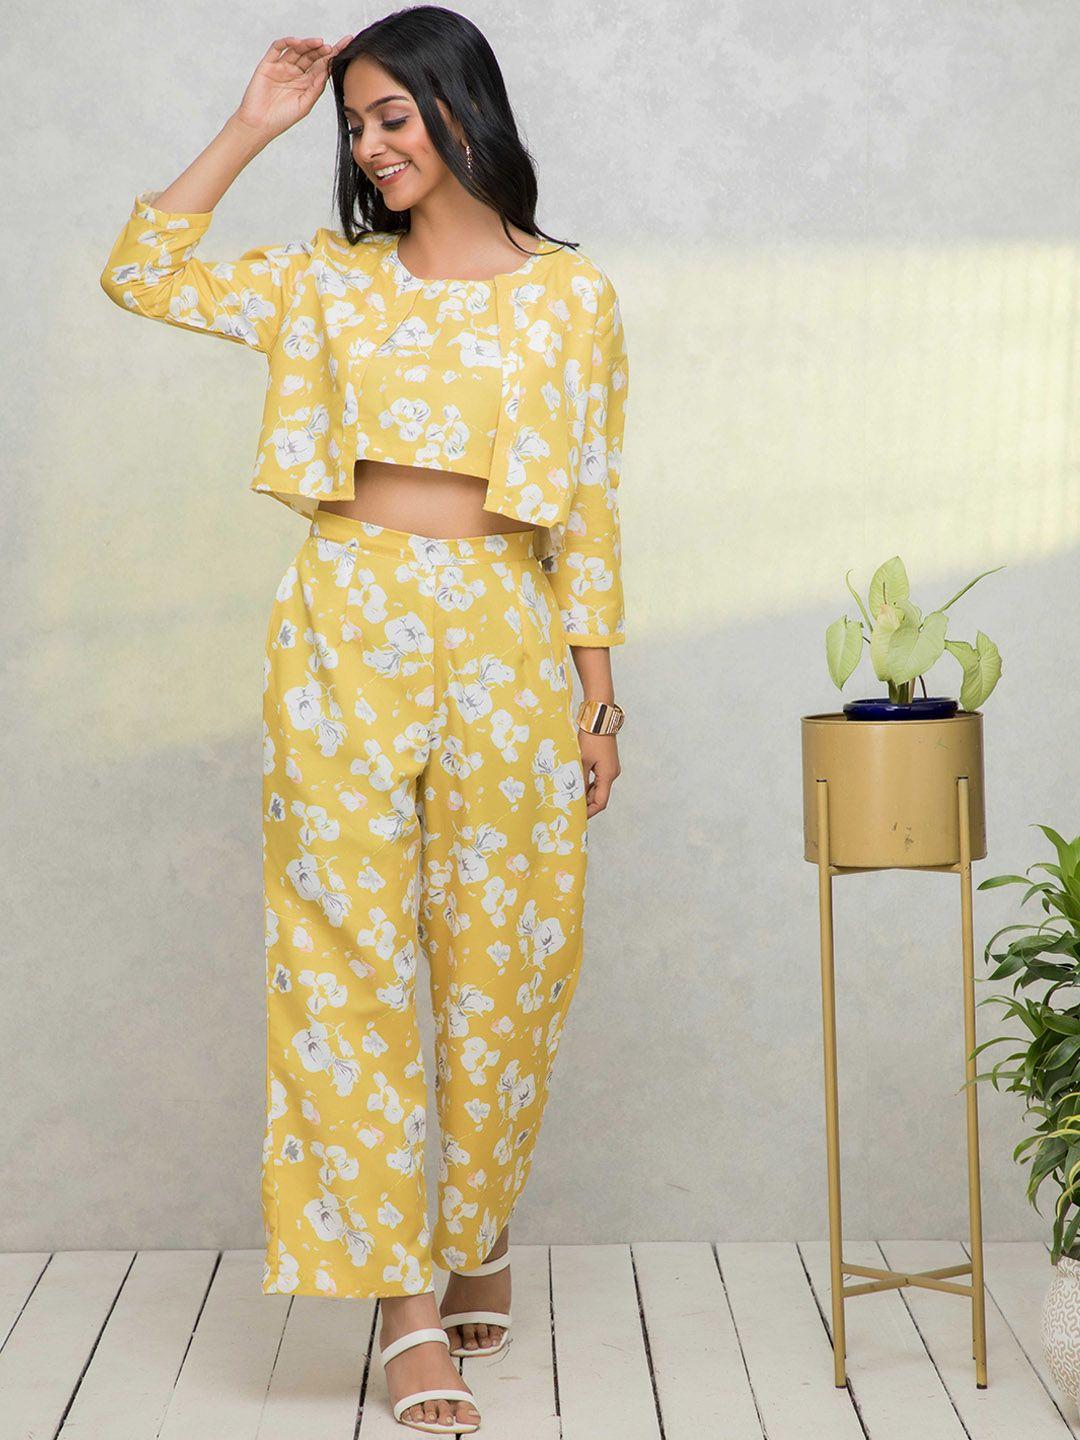 dressberry yellow & white printed top & trouser